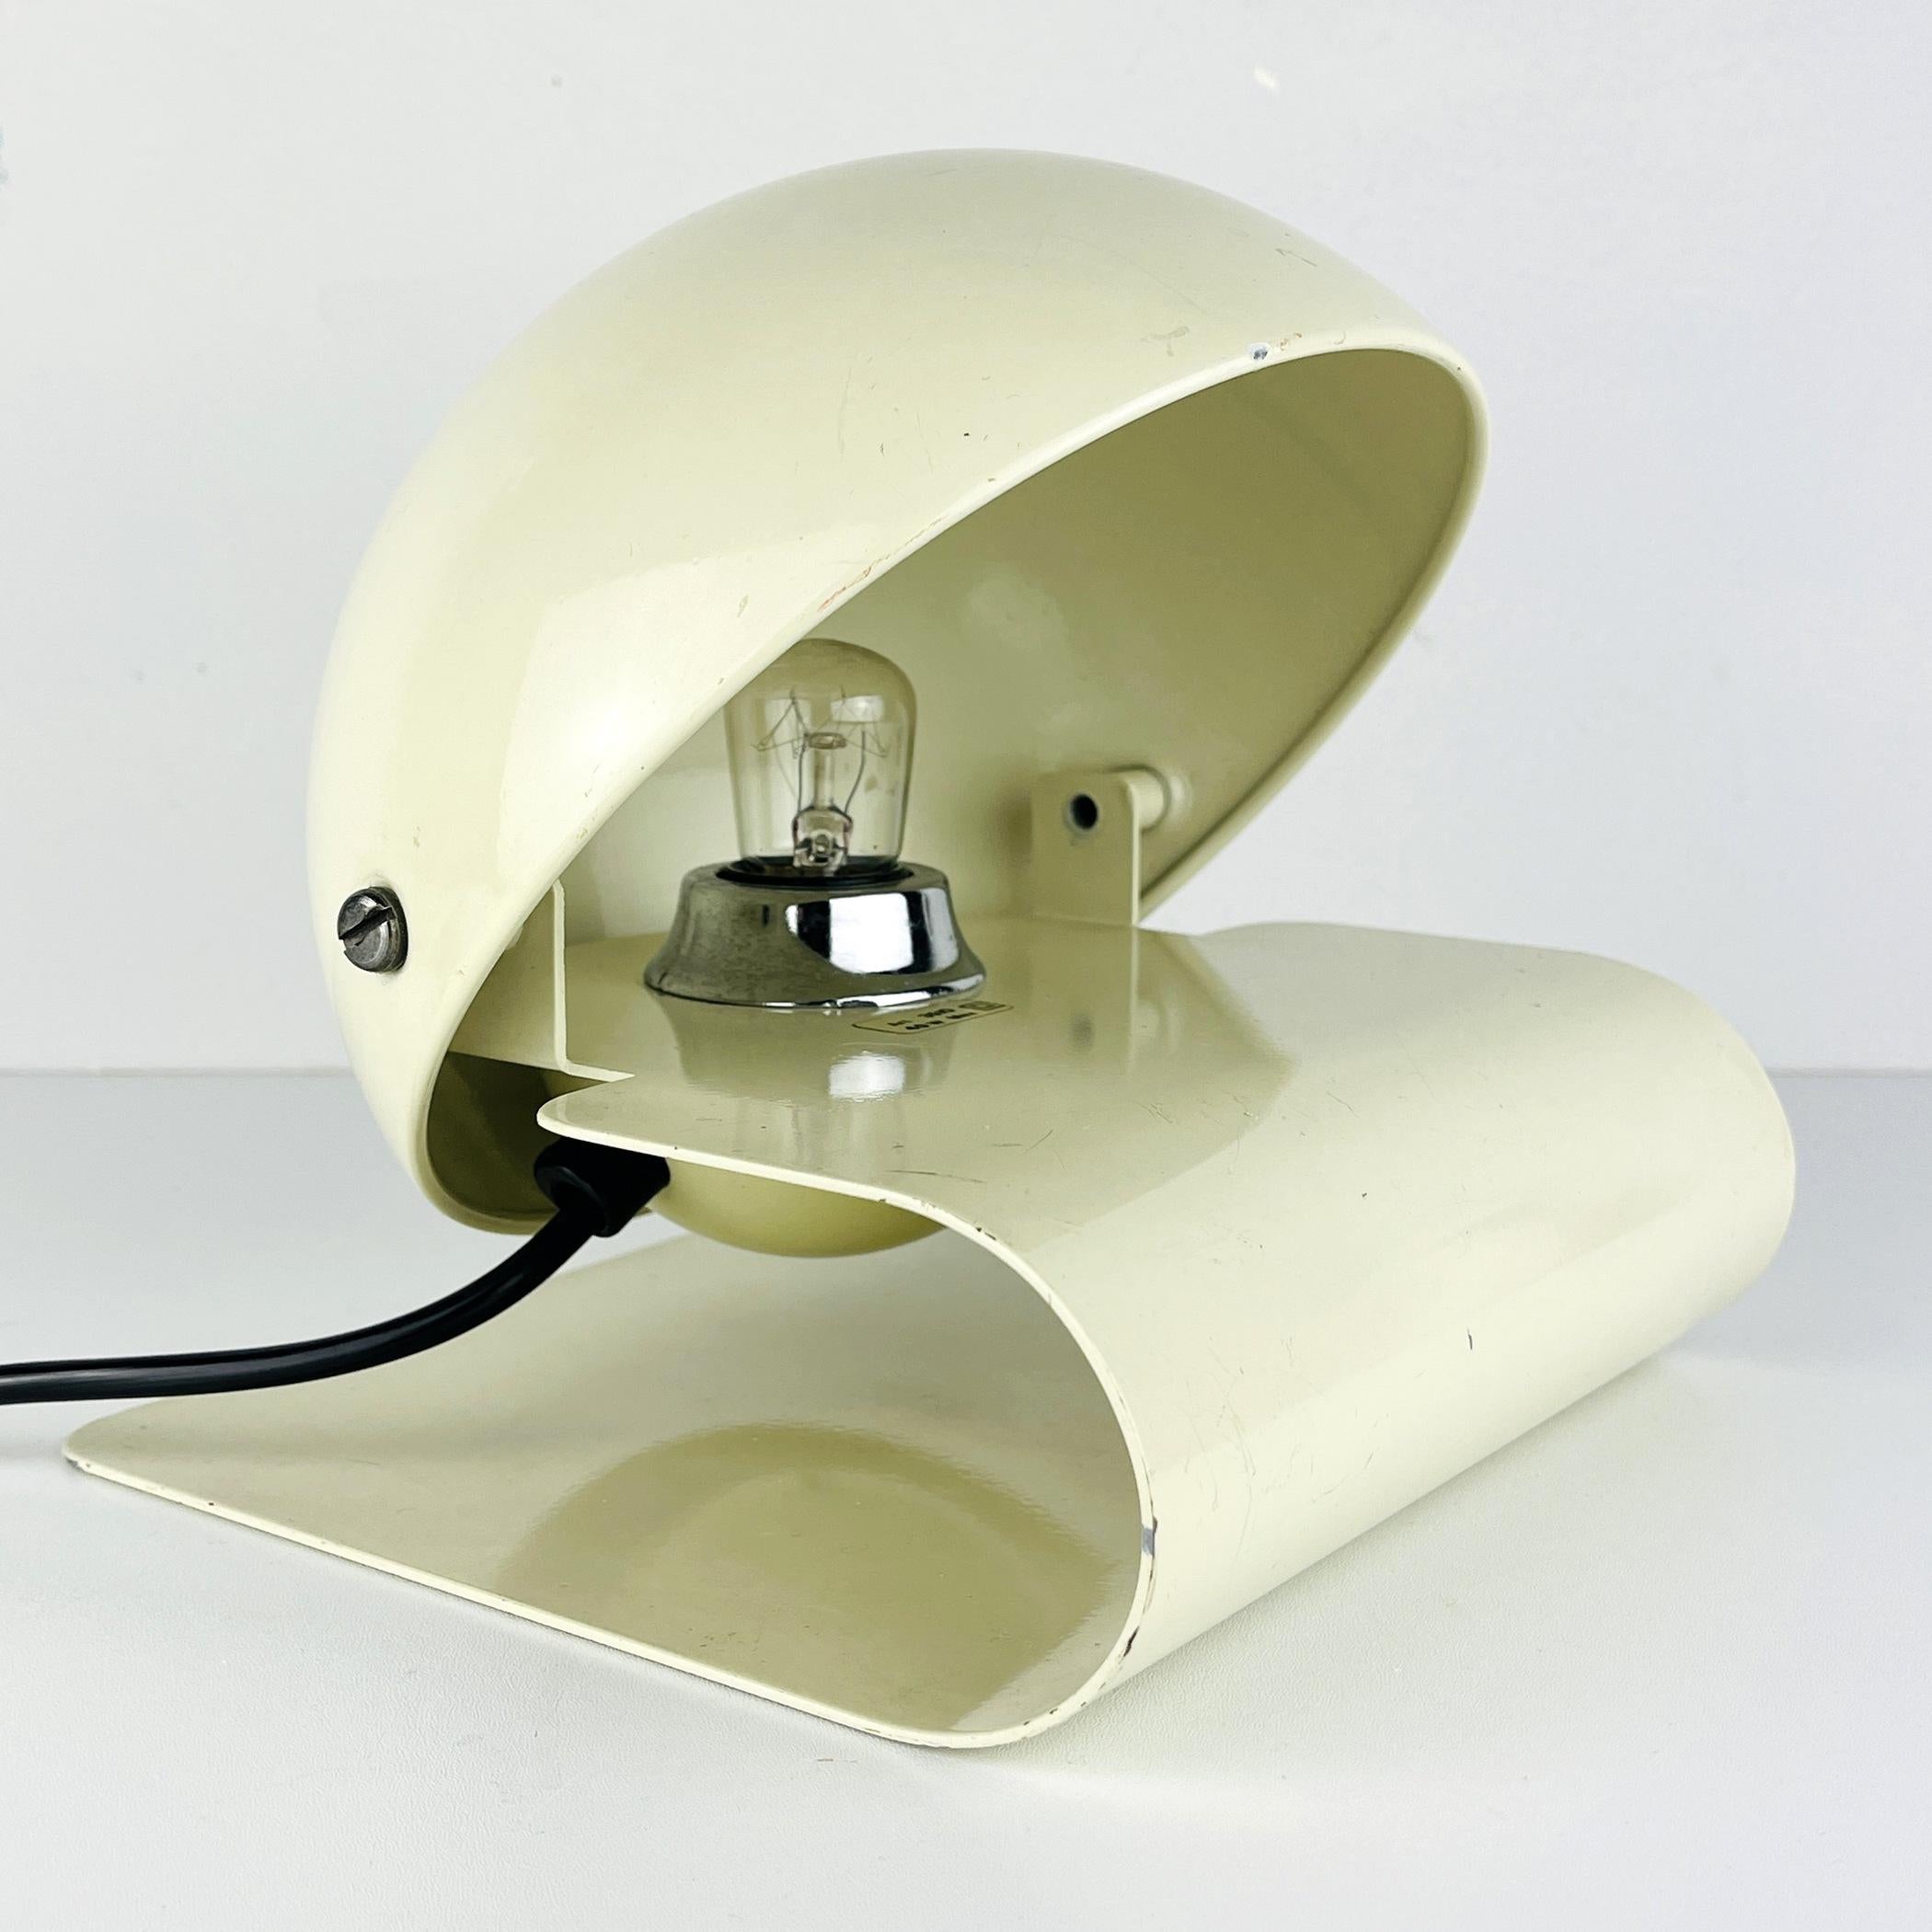 Mid-century metal table lamp by Giuseppe Cormio for iGuzzini Italy 1970s. Giuseppe Cormio designed the Bugia table lamp for the 1975 Milan Fair. A year later, it was put into production. White painted folded curved metal base. Half round metal